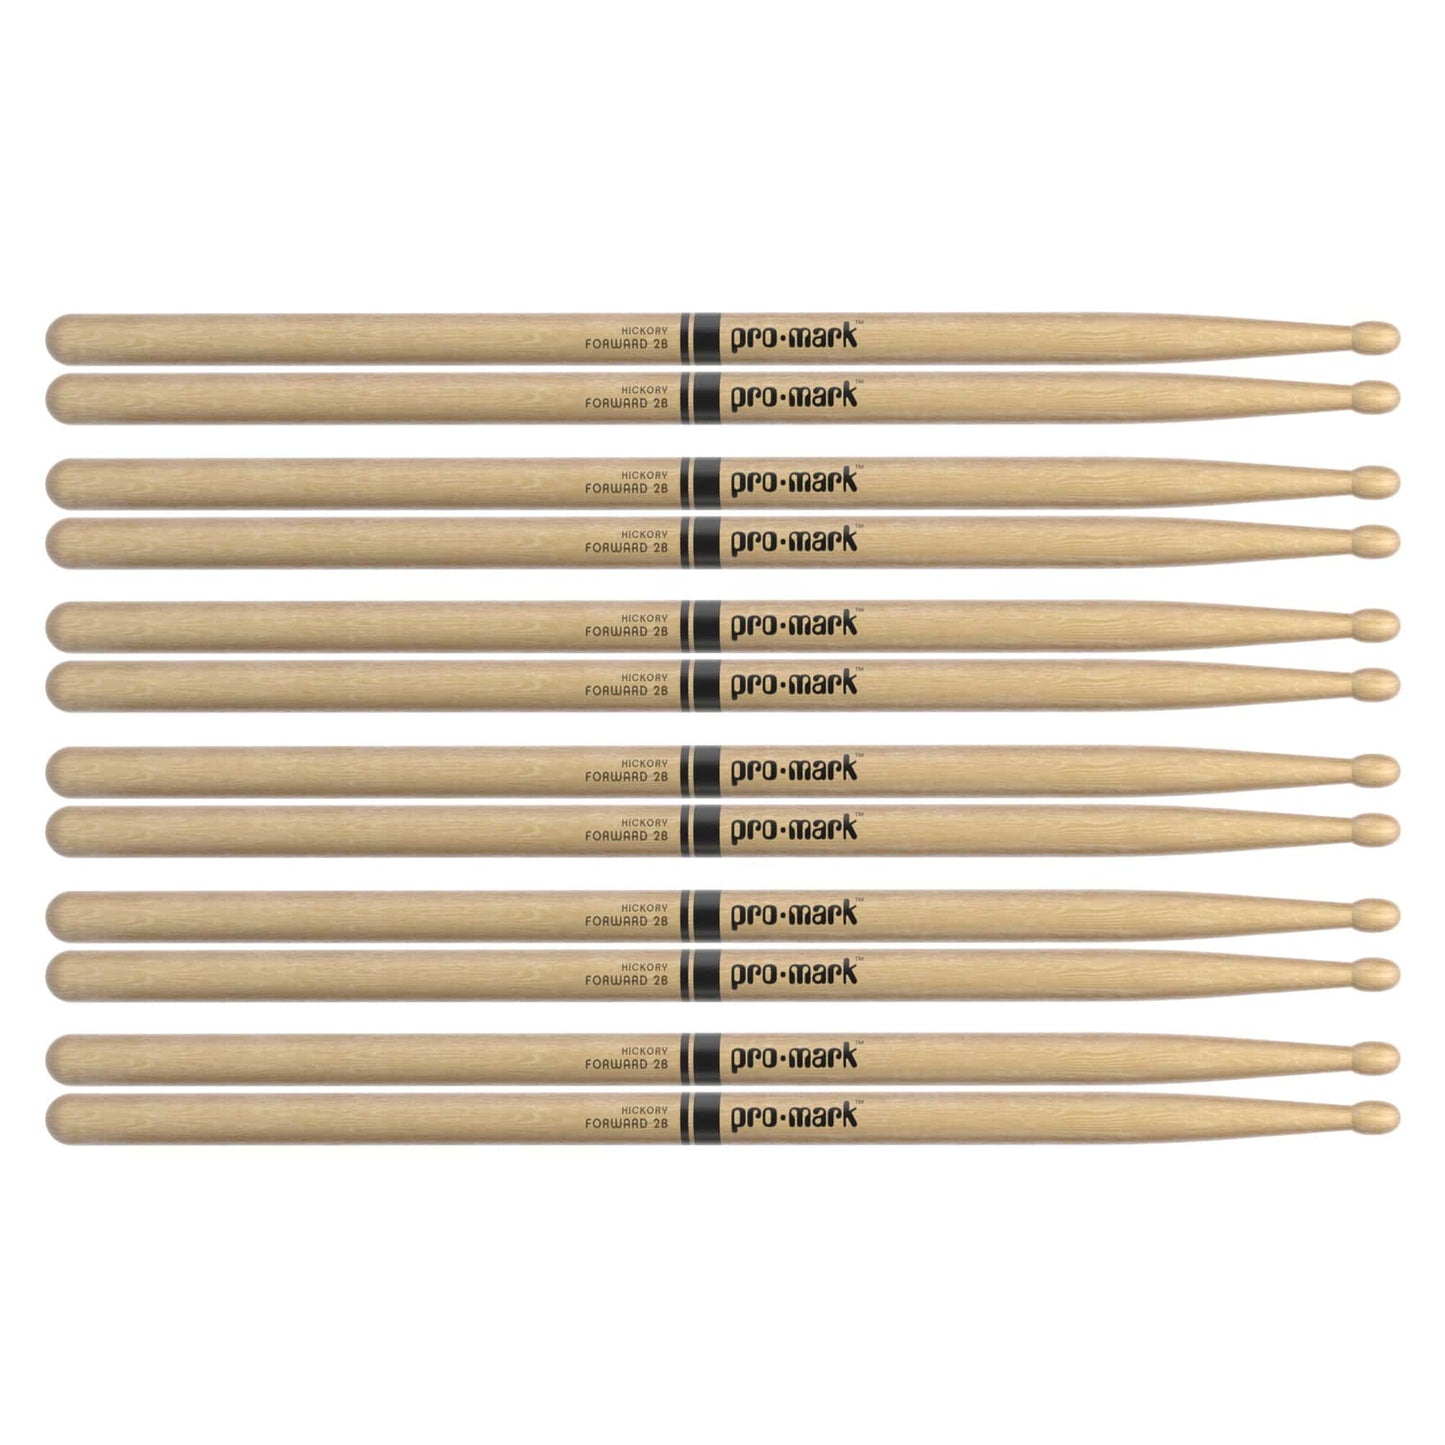 Promark American Hickory 2B Wood Tip Drum Sticks (6 Pair Bundle) Drums and Percussion / Parts and Accessories / Drum Sticks and Mallets